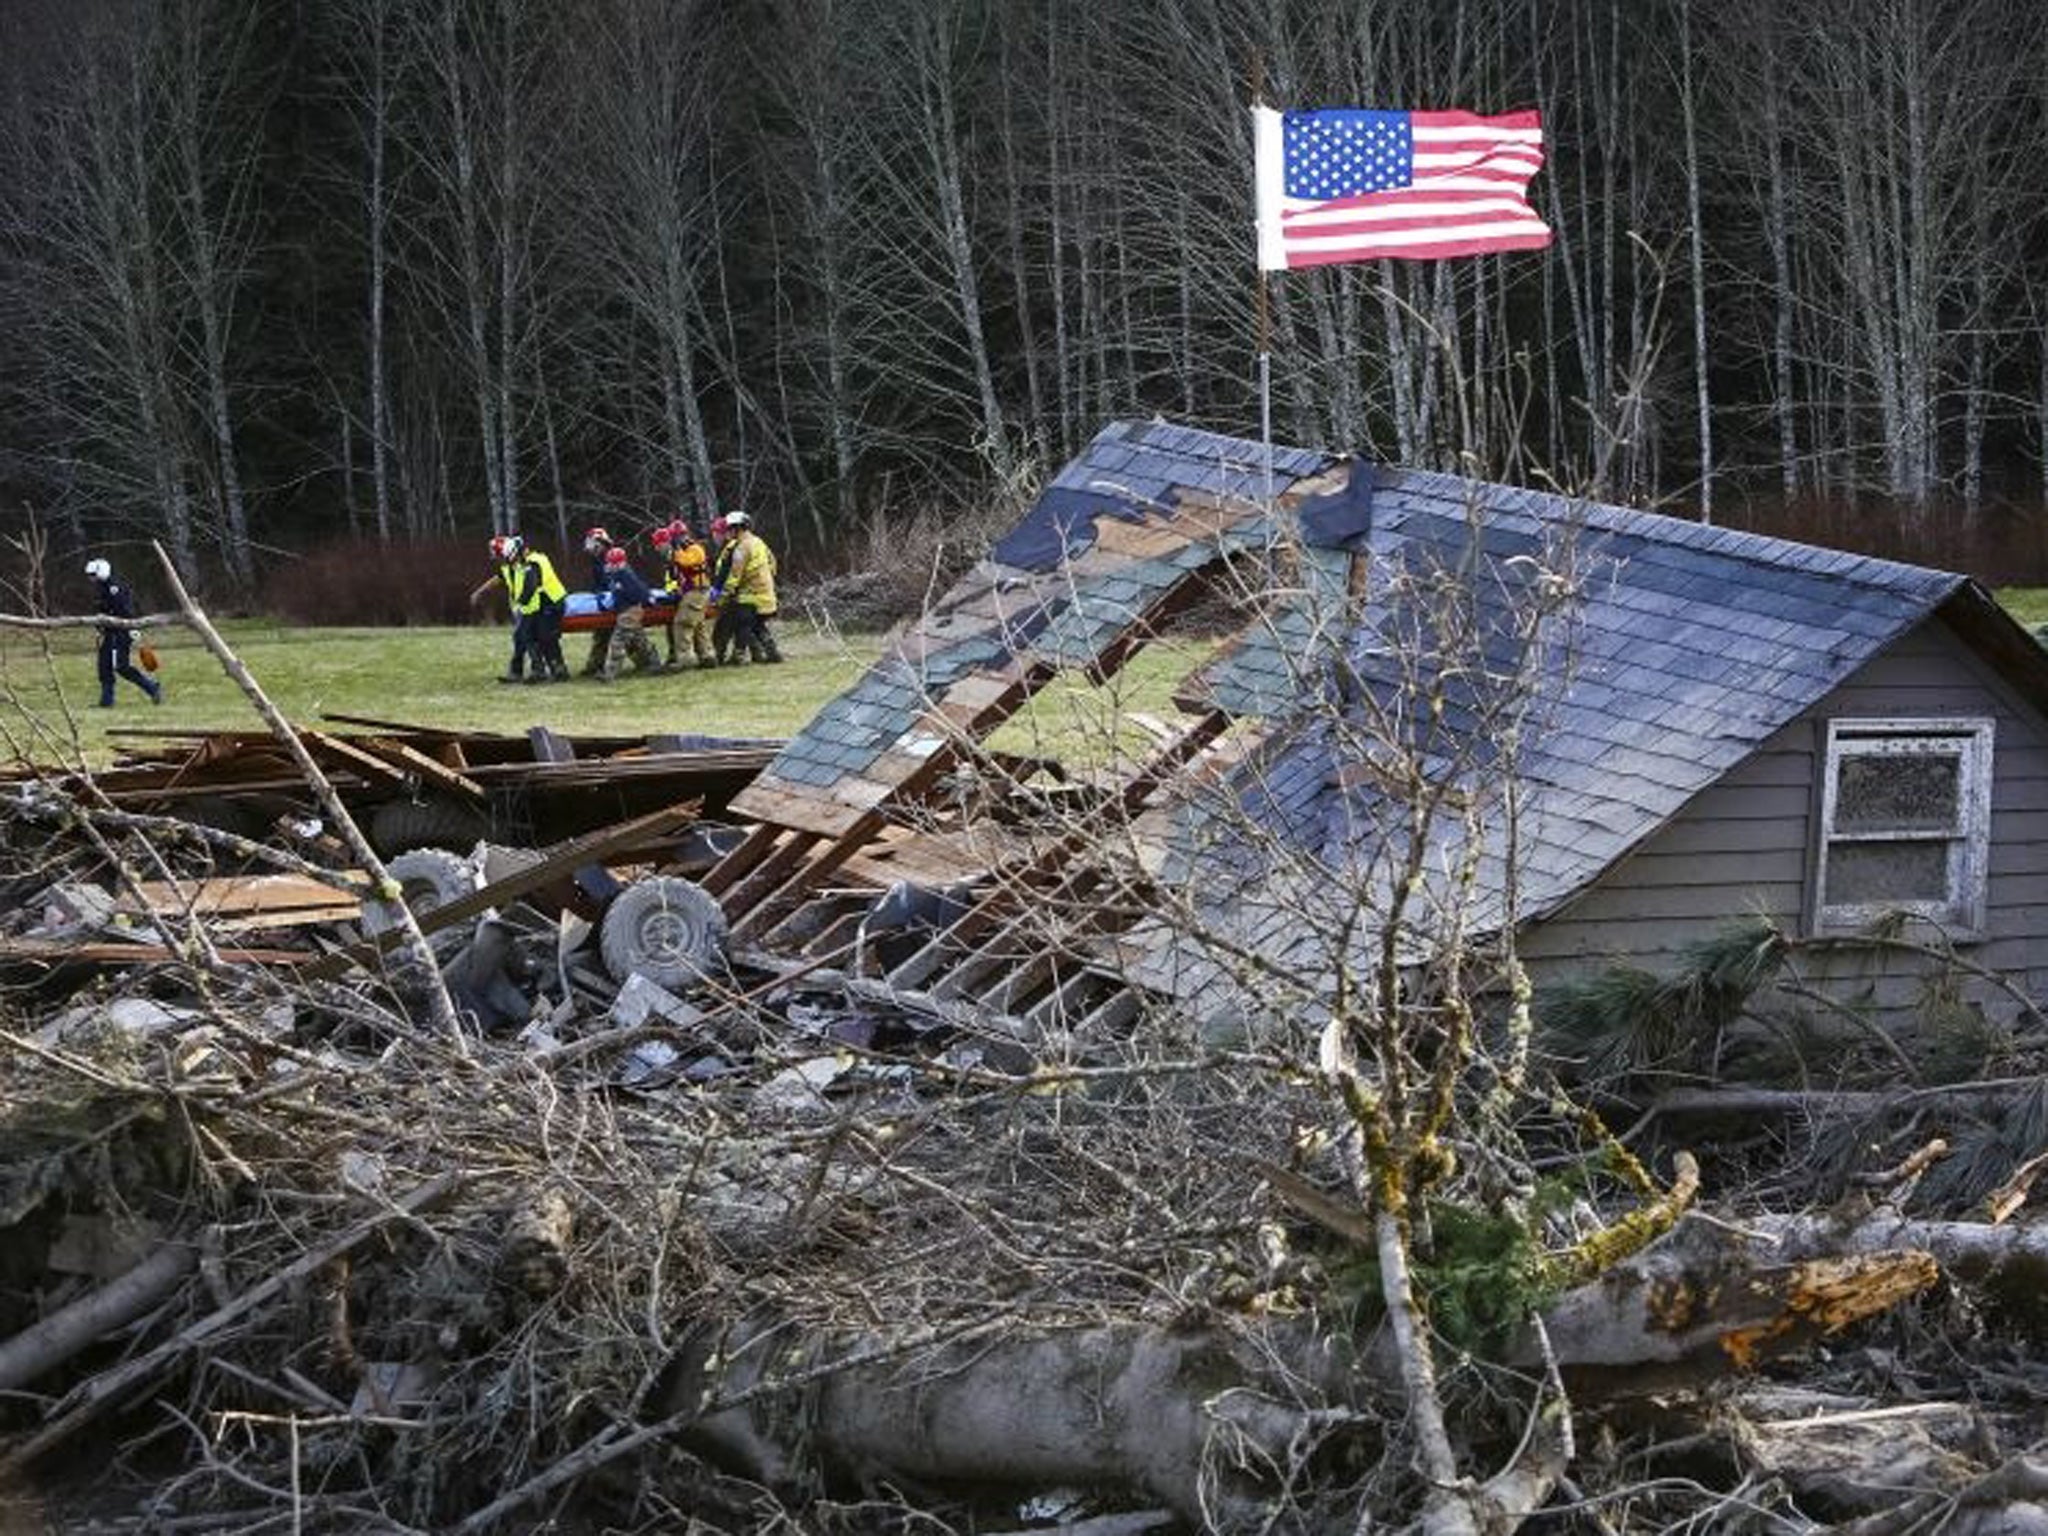 Rescue workers remove a body from the wreckage of homes destroyed by a mudslide near Oso